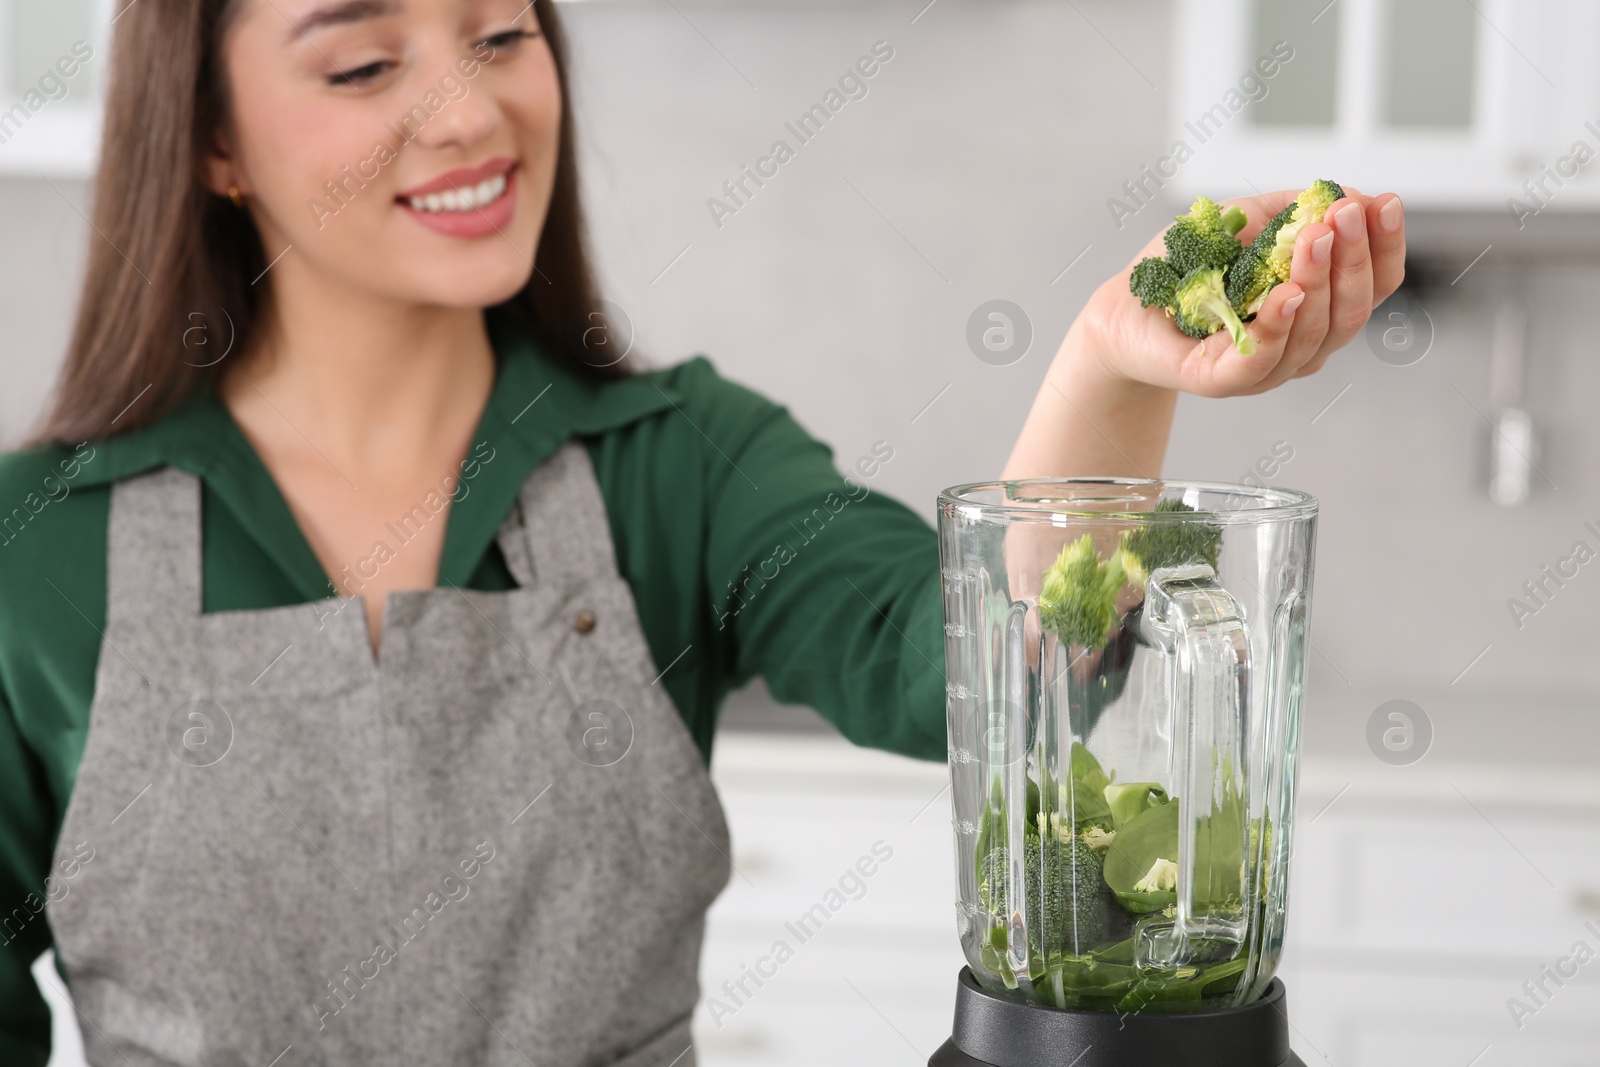 Photo of Woman adding broccoli into blender with ingredients for smoothie in kitchen, focus on hand